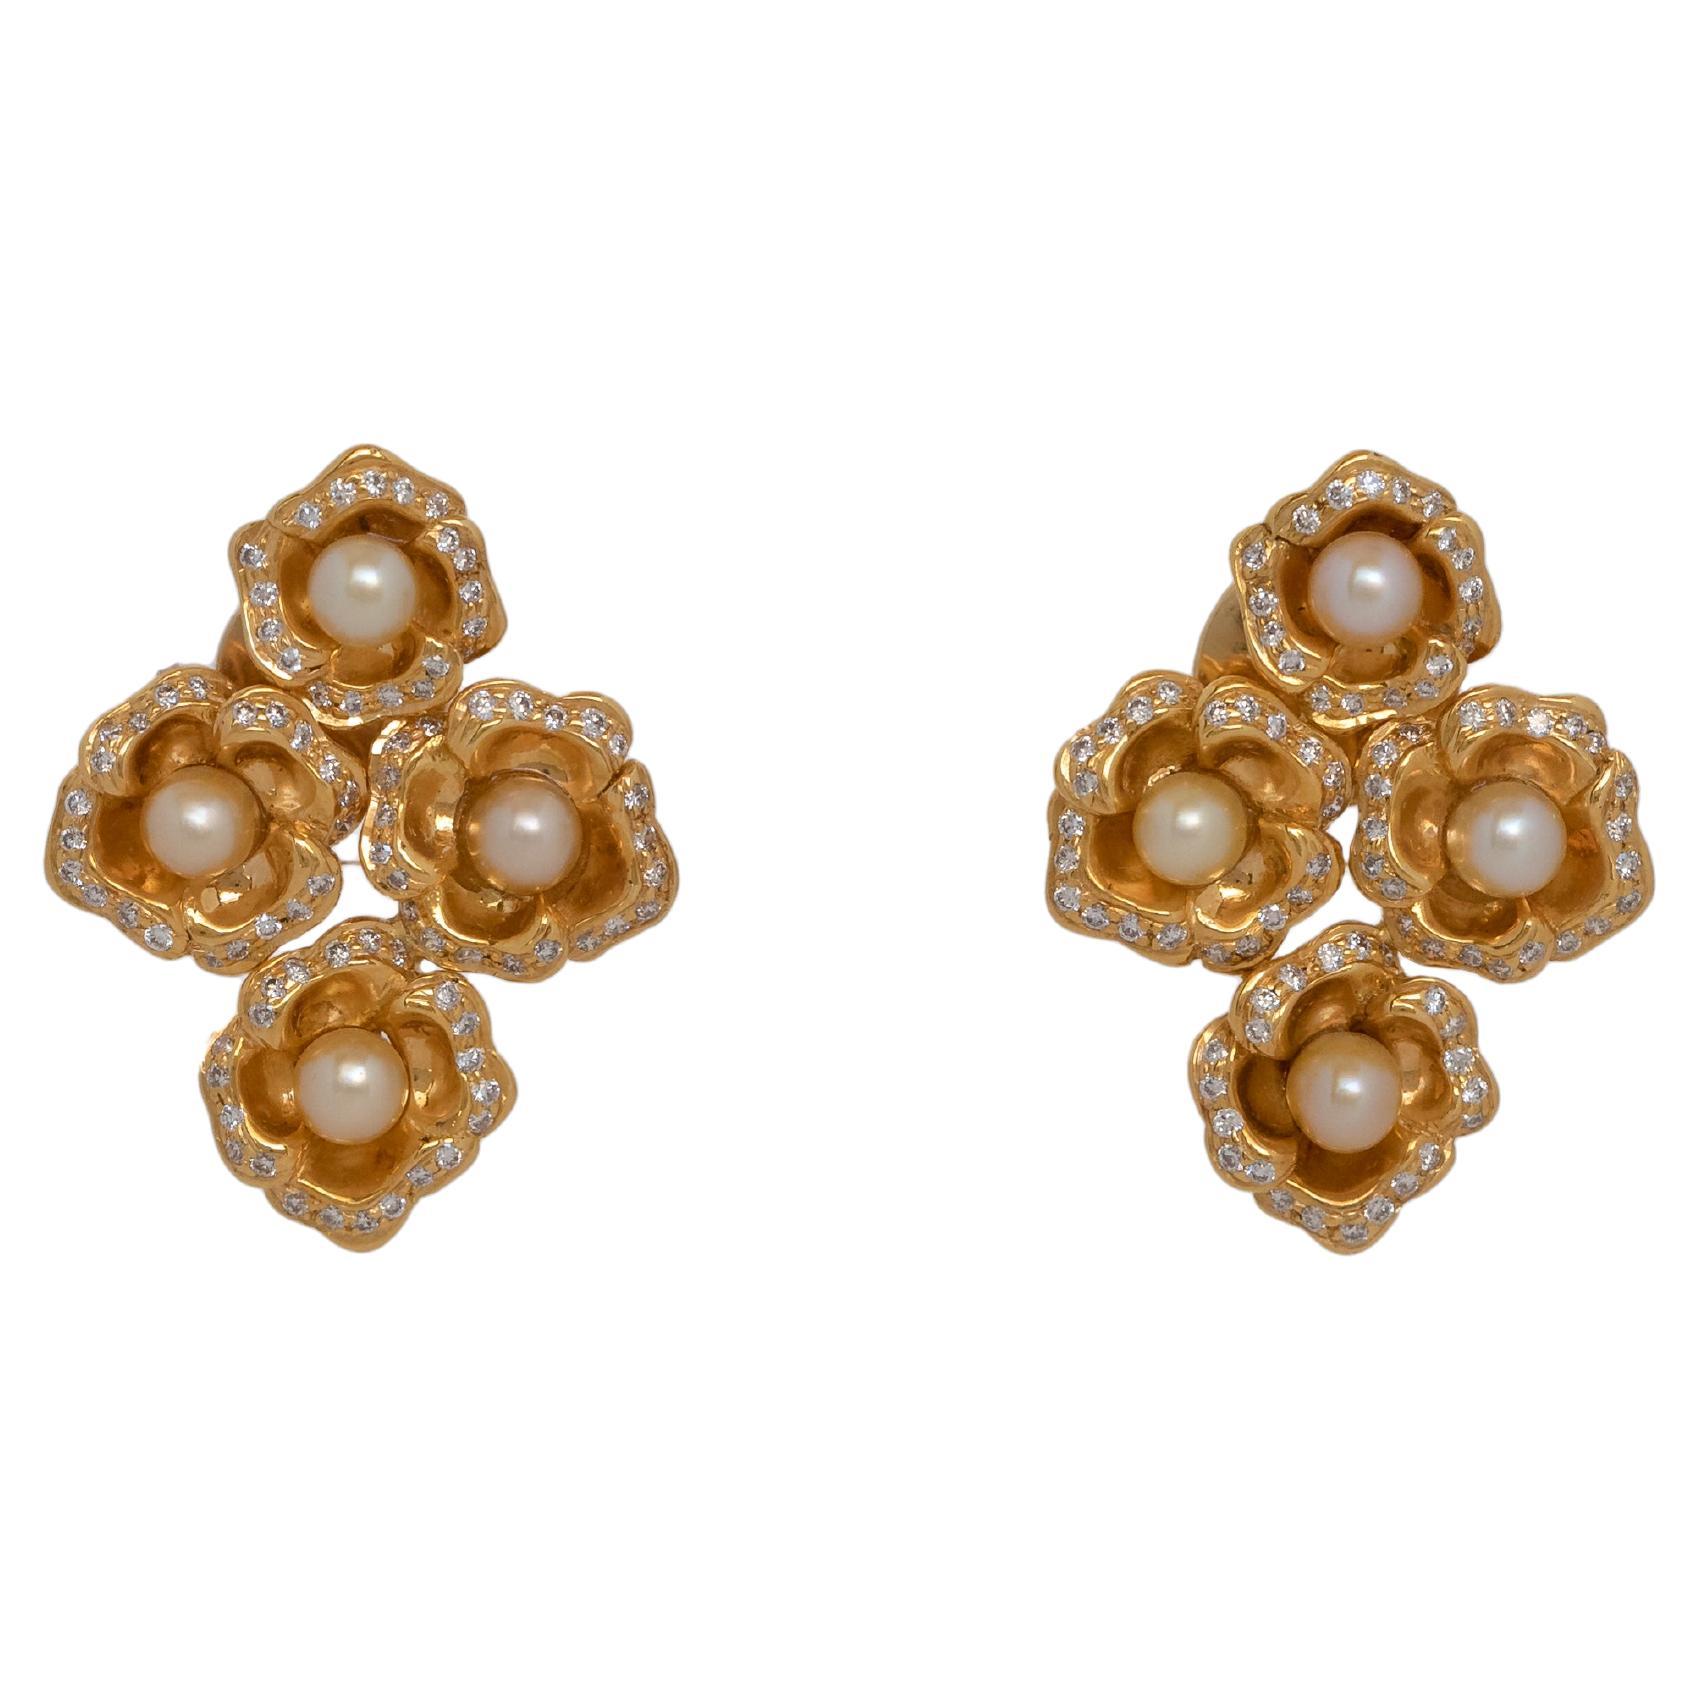 Certified Natural Bahraini Pearls Flowers Earrings with Diamonds in 18 Kt Gold For Sale